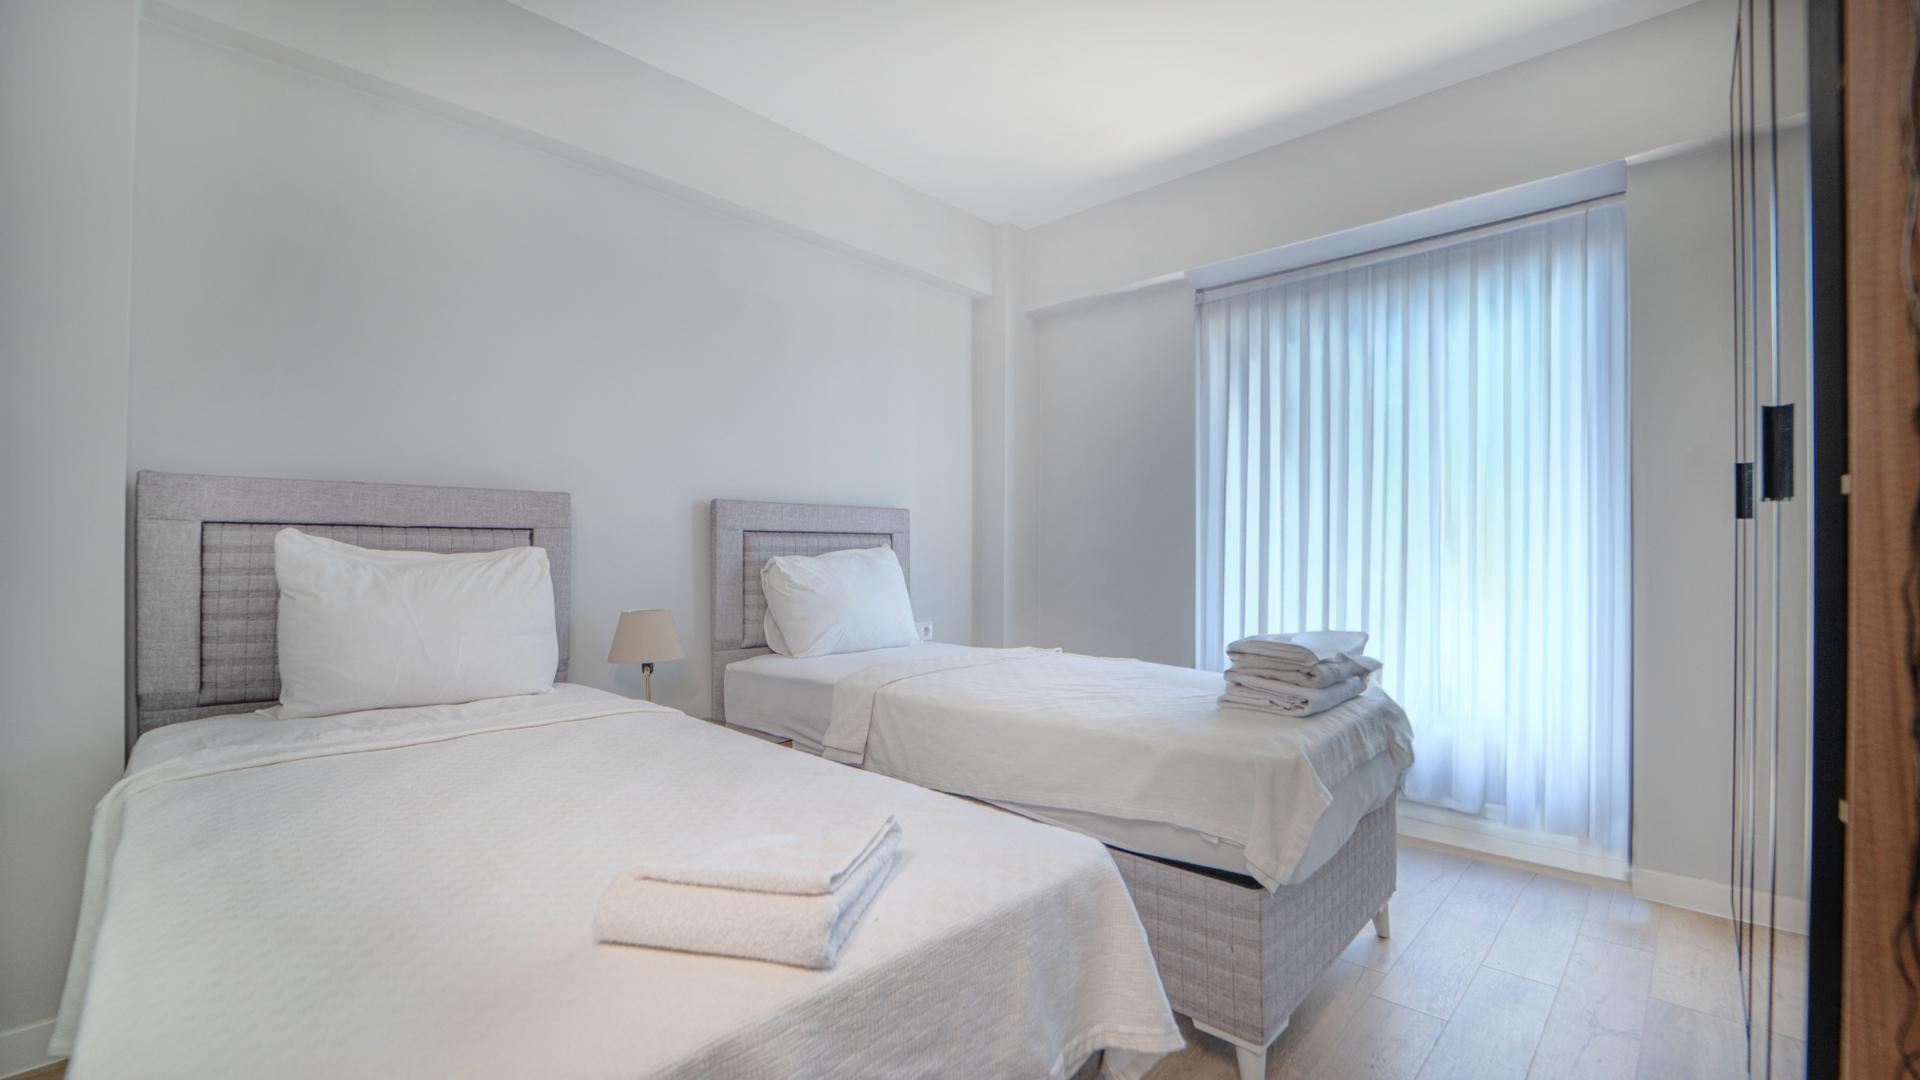 Experience a cozy and relaxing stay in our well-appointed bedroom with twin beds.